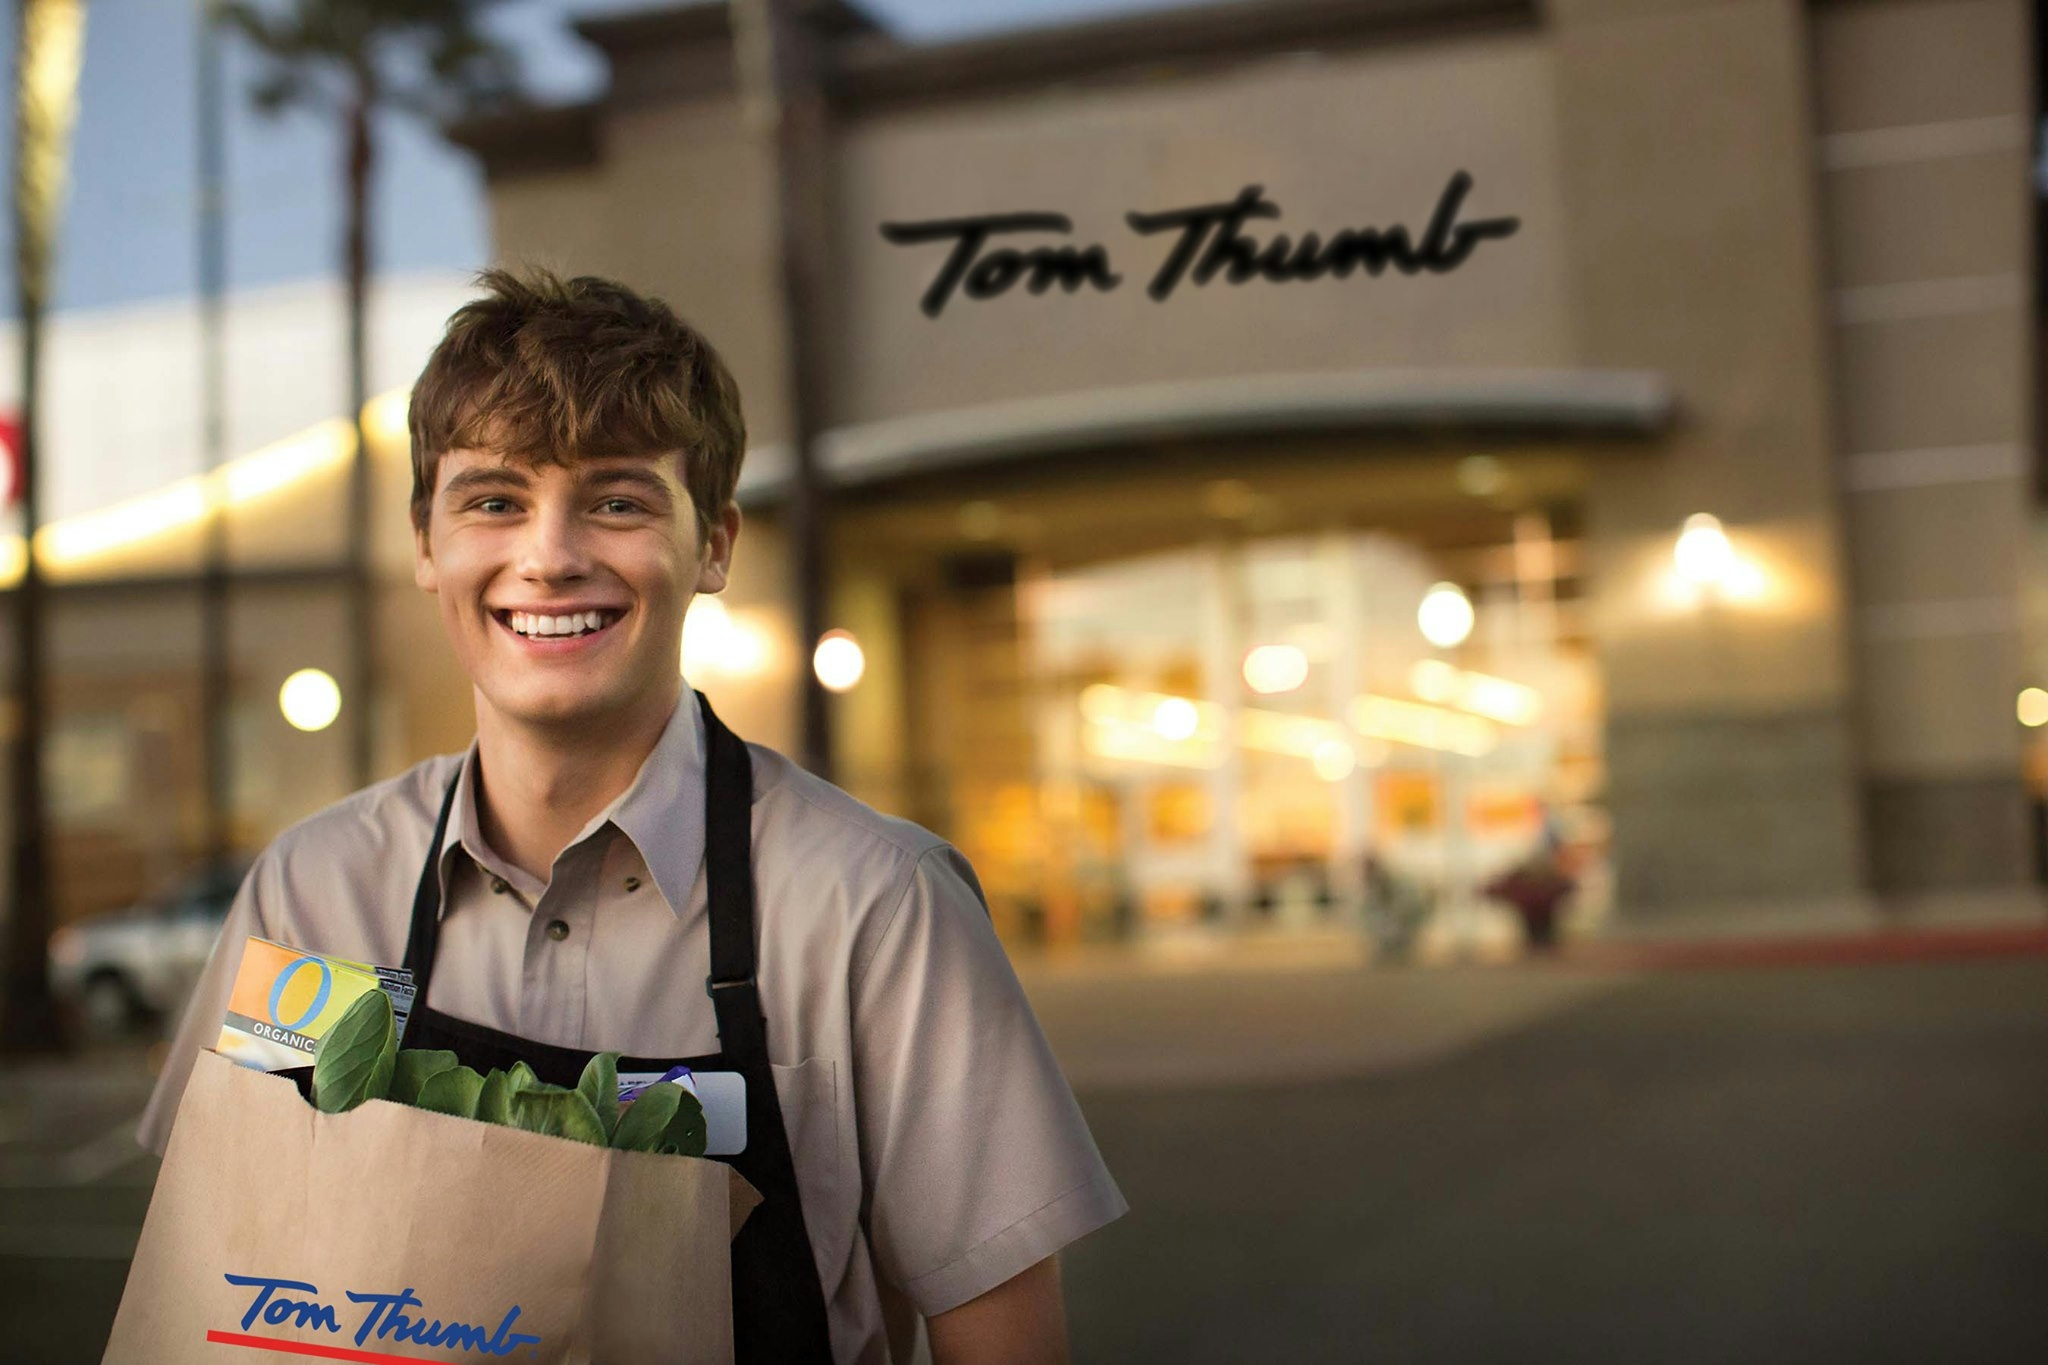 Tom Thumb store with smiling employee holding a grocery bag in front of it.